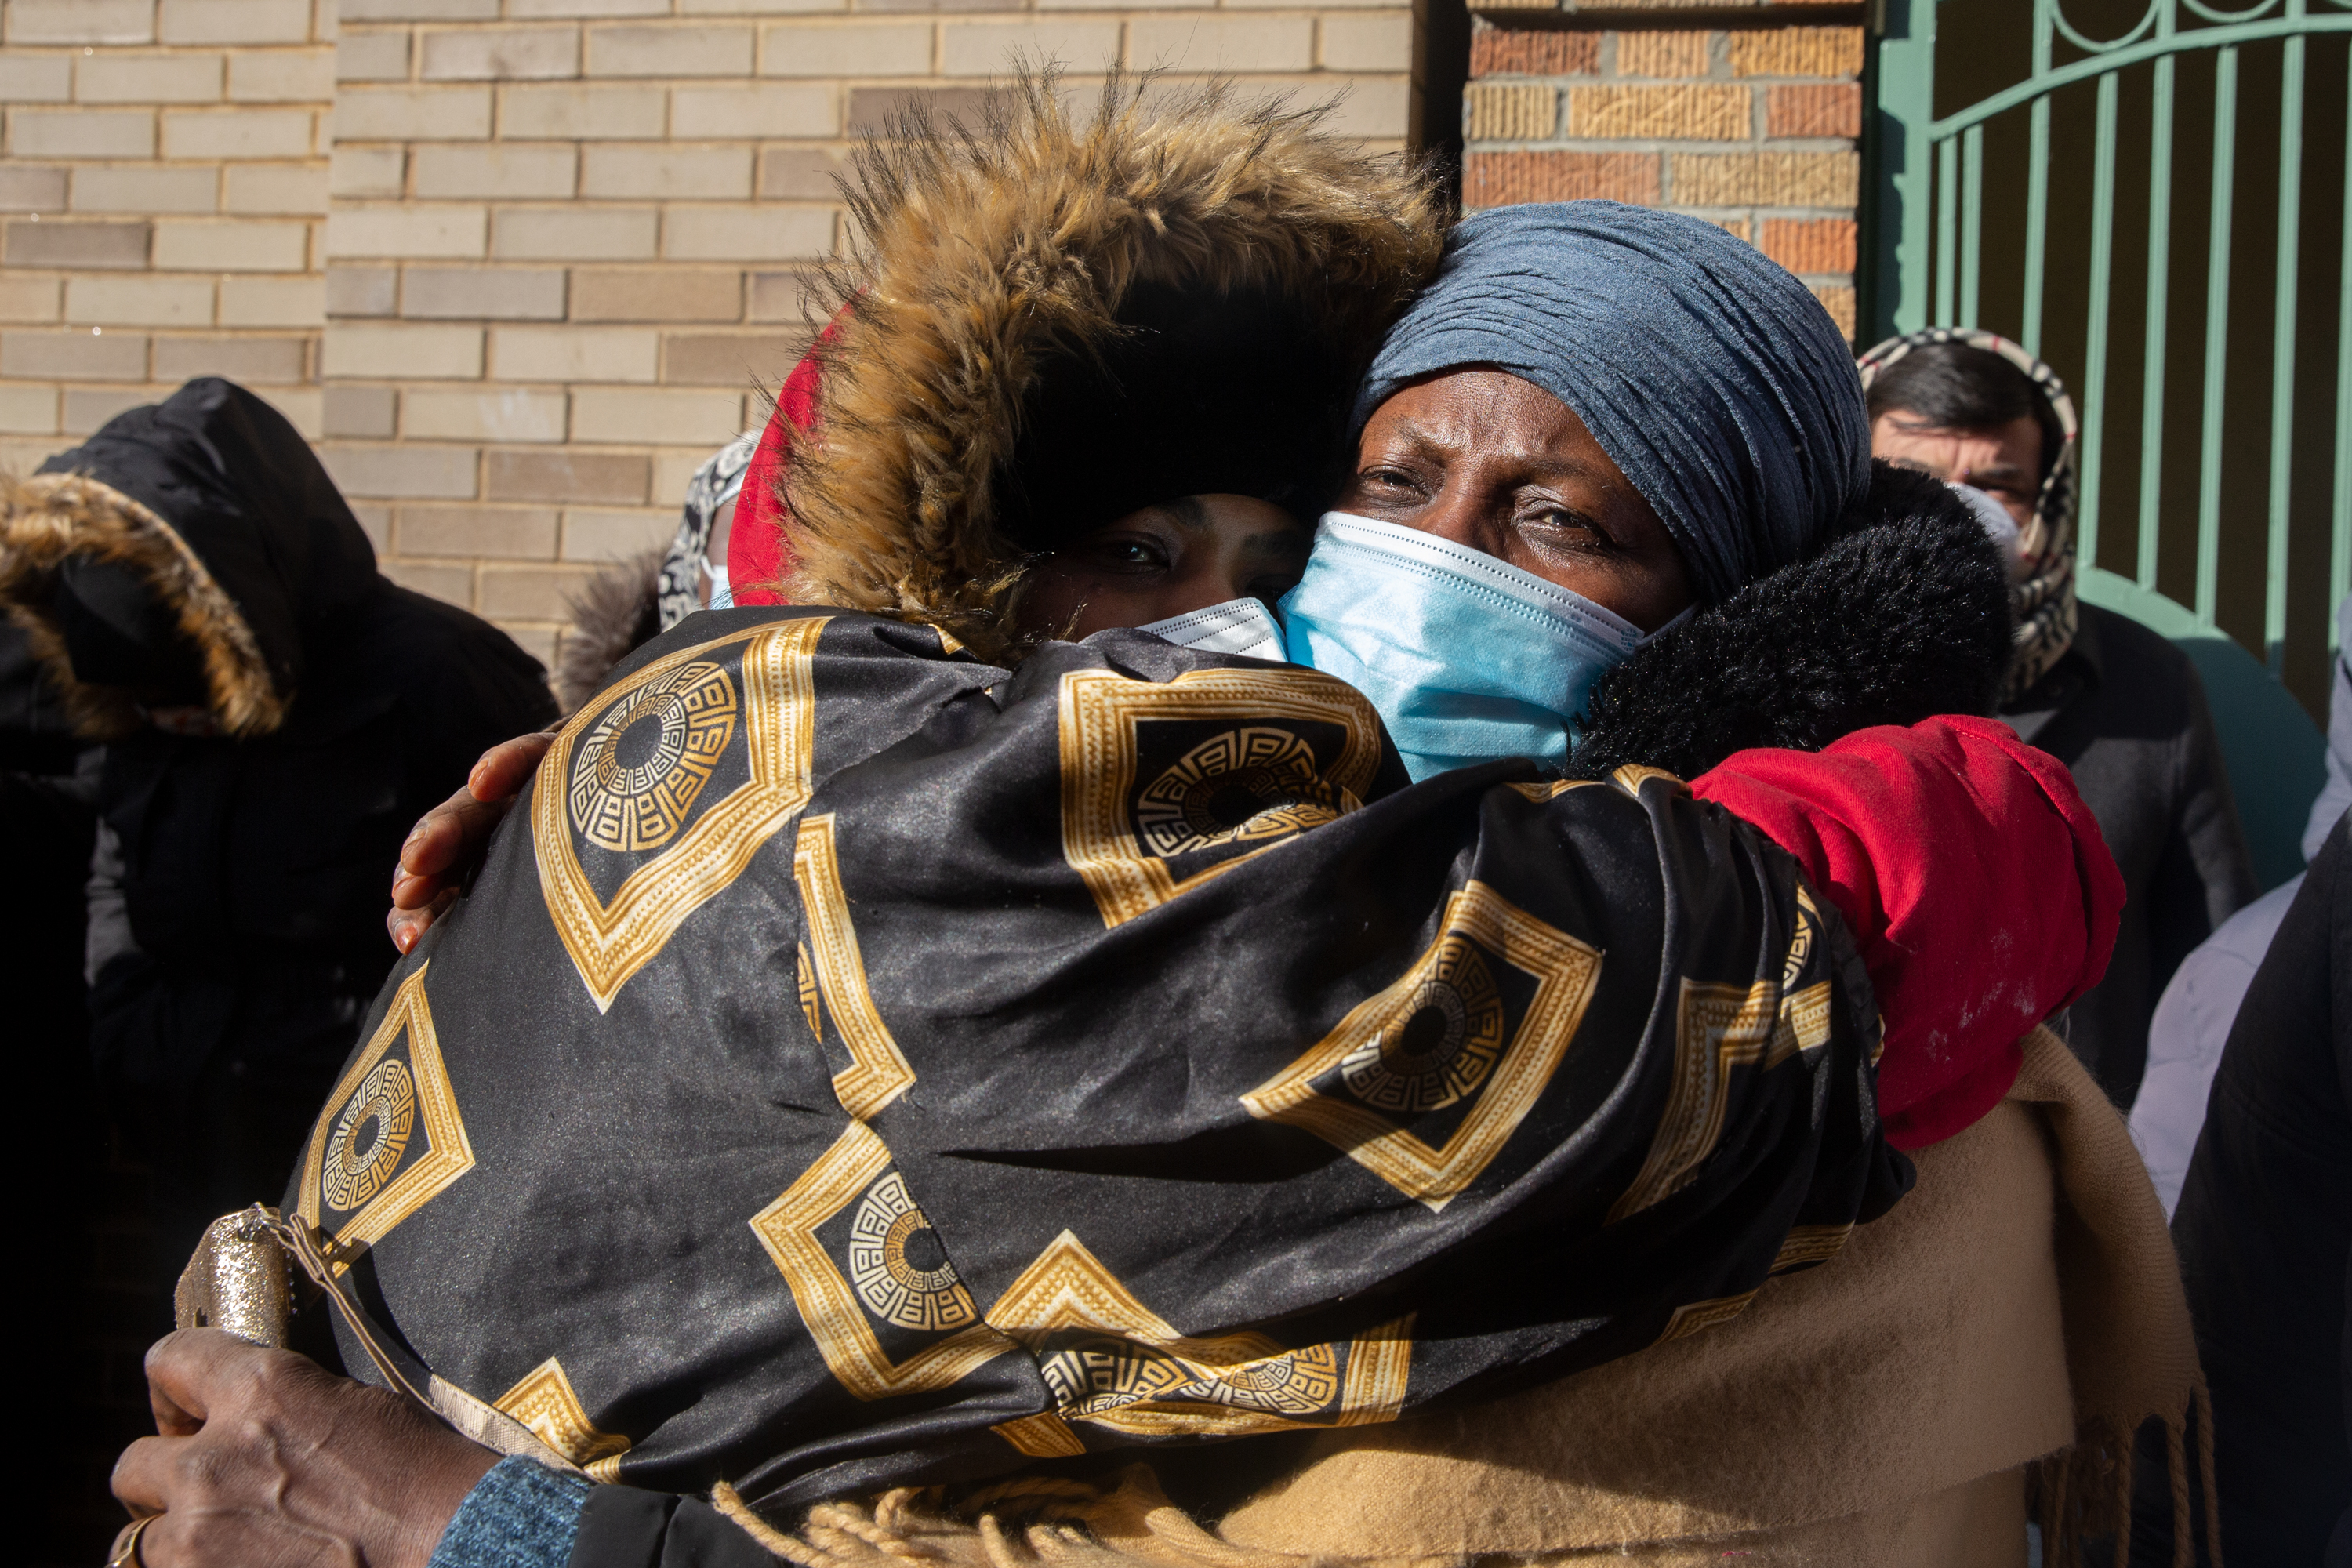 Fatou Ndiaye, right, embraces, Isatou Jallow during a funeral at the Islamic Culture Center on East 166th Street for 15 people killed in a Bronx building fire, Jan. 16, 2022.